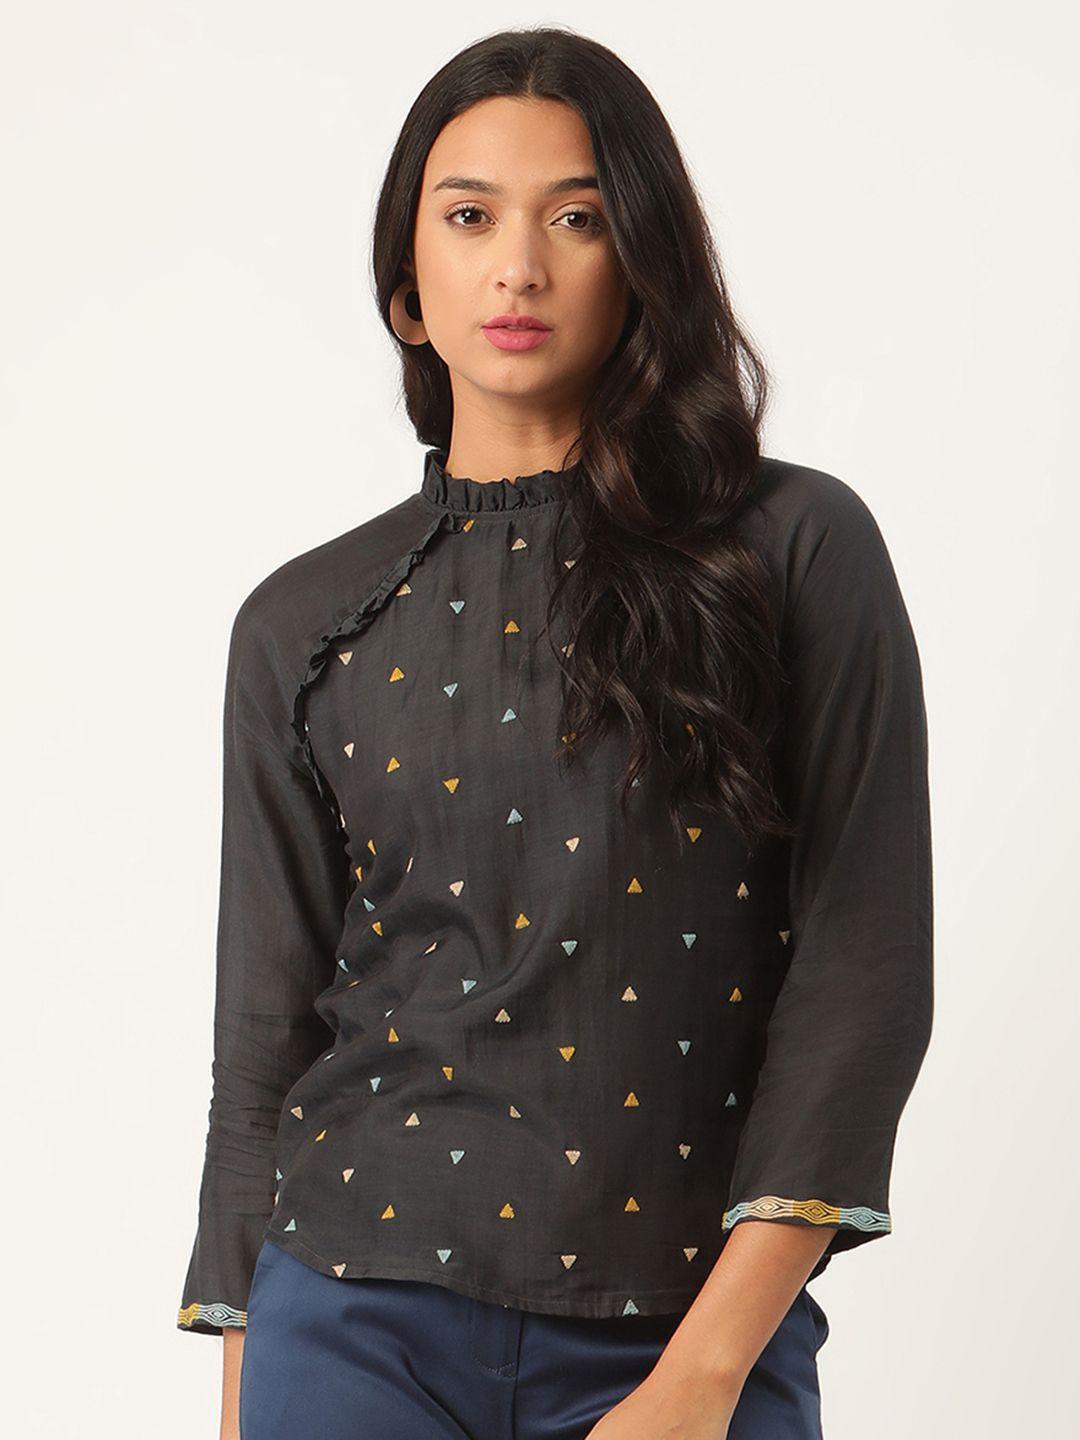 rooted women navy blue embroidered top